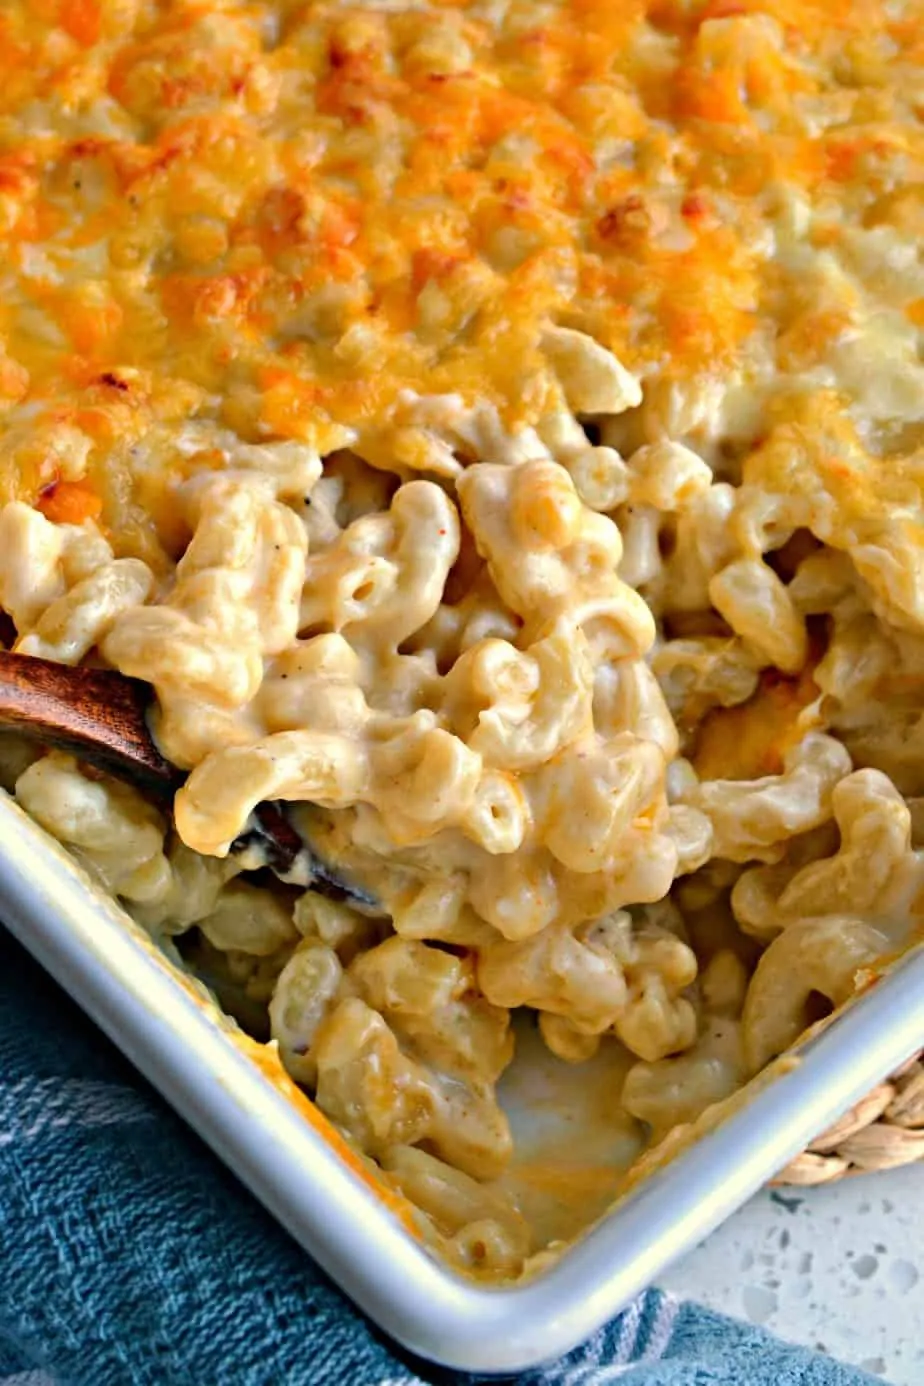 This Baked Macaroni and Cheese is over the top heavenly creamy with oodles of the perfect blend of cheeses.